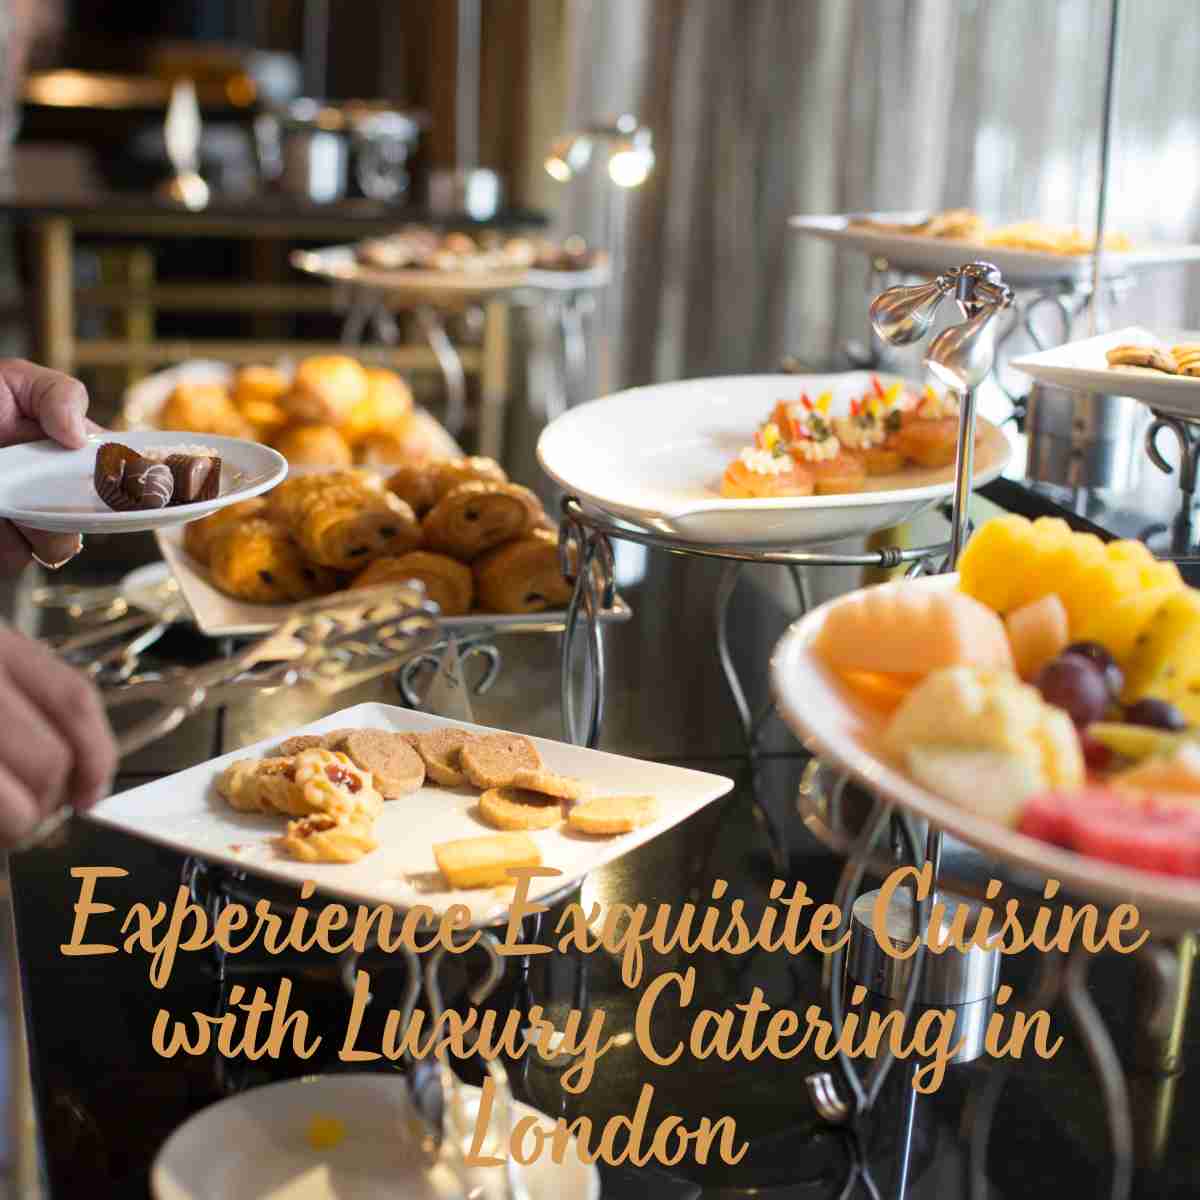 Cuisine with Luxury Catering in London